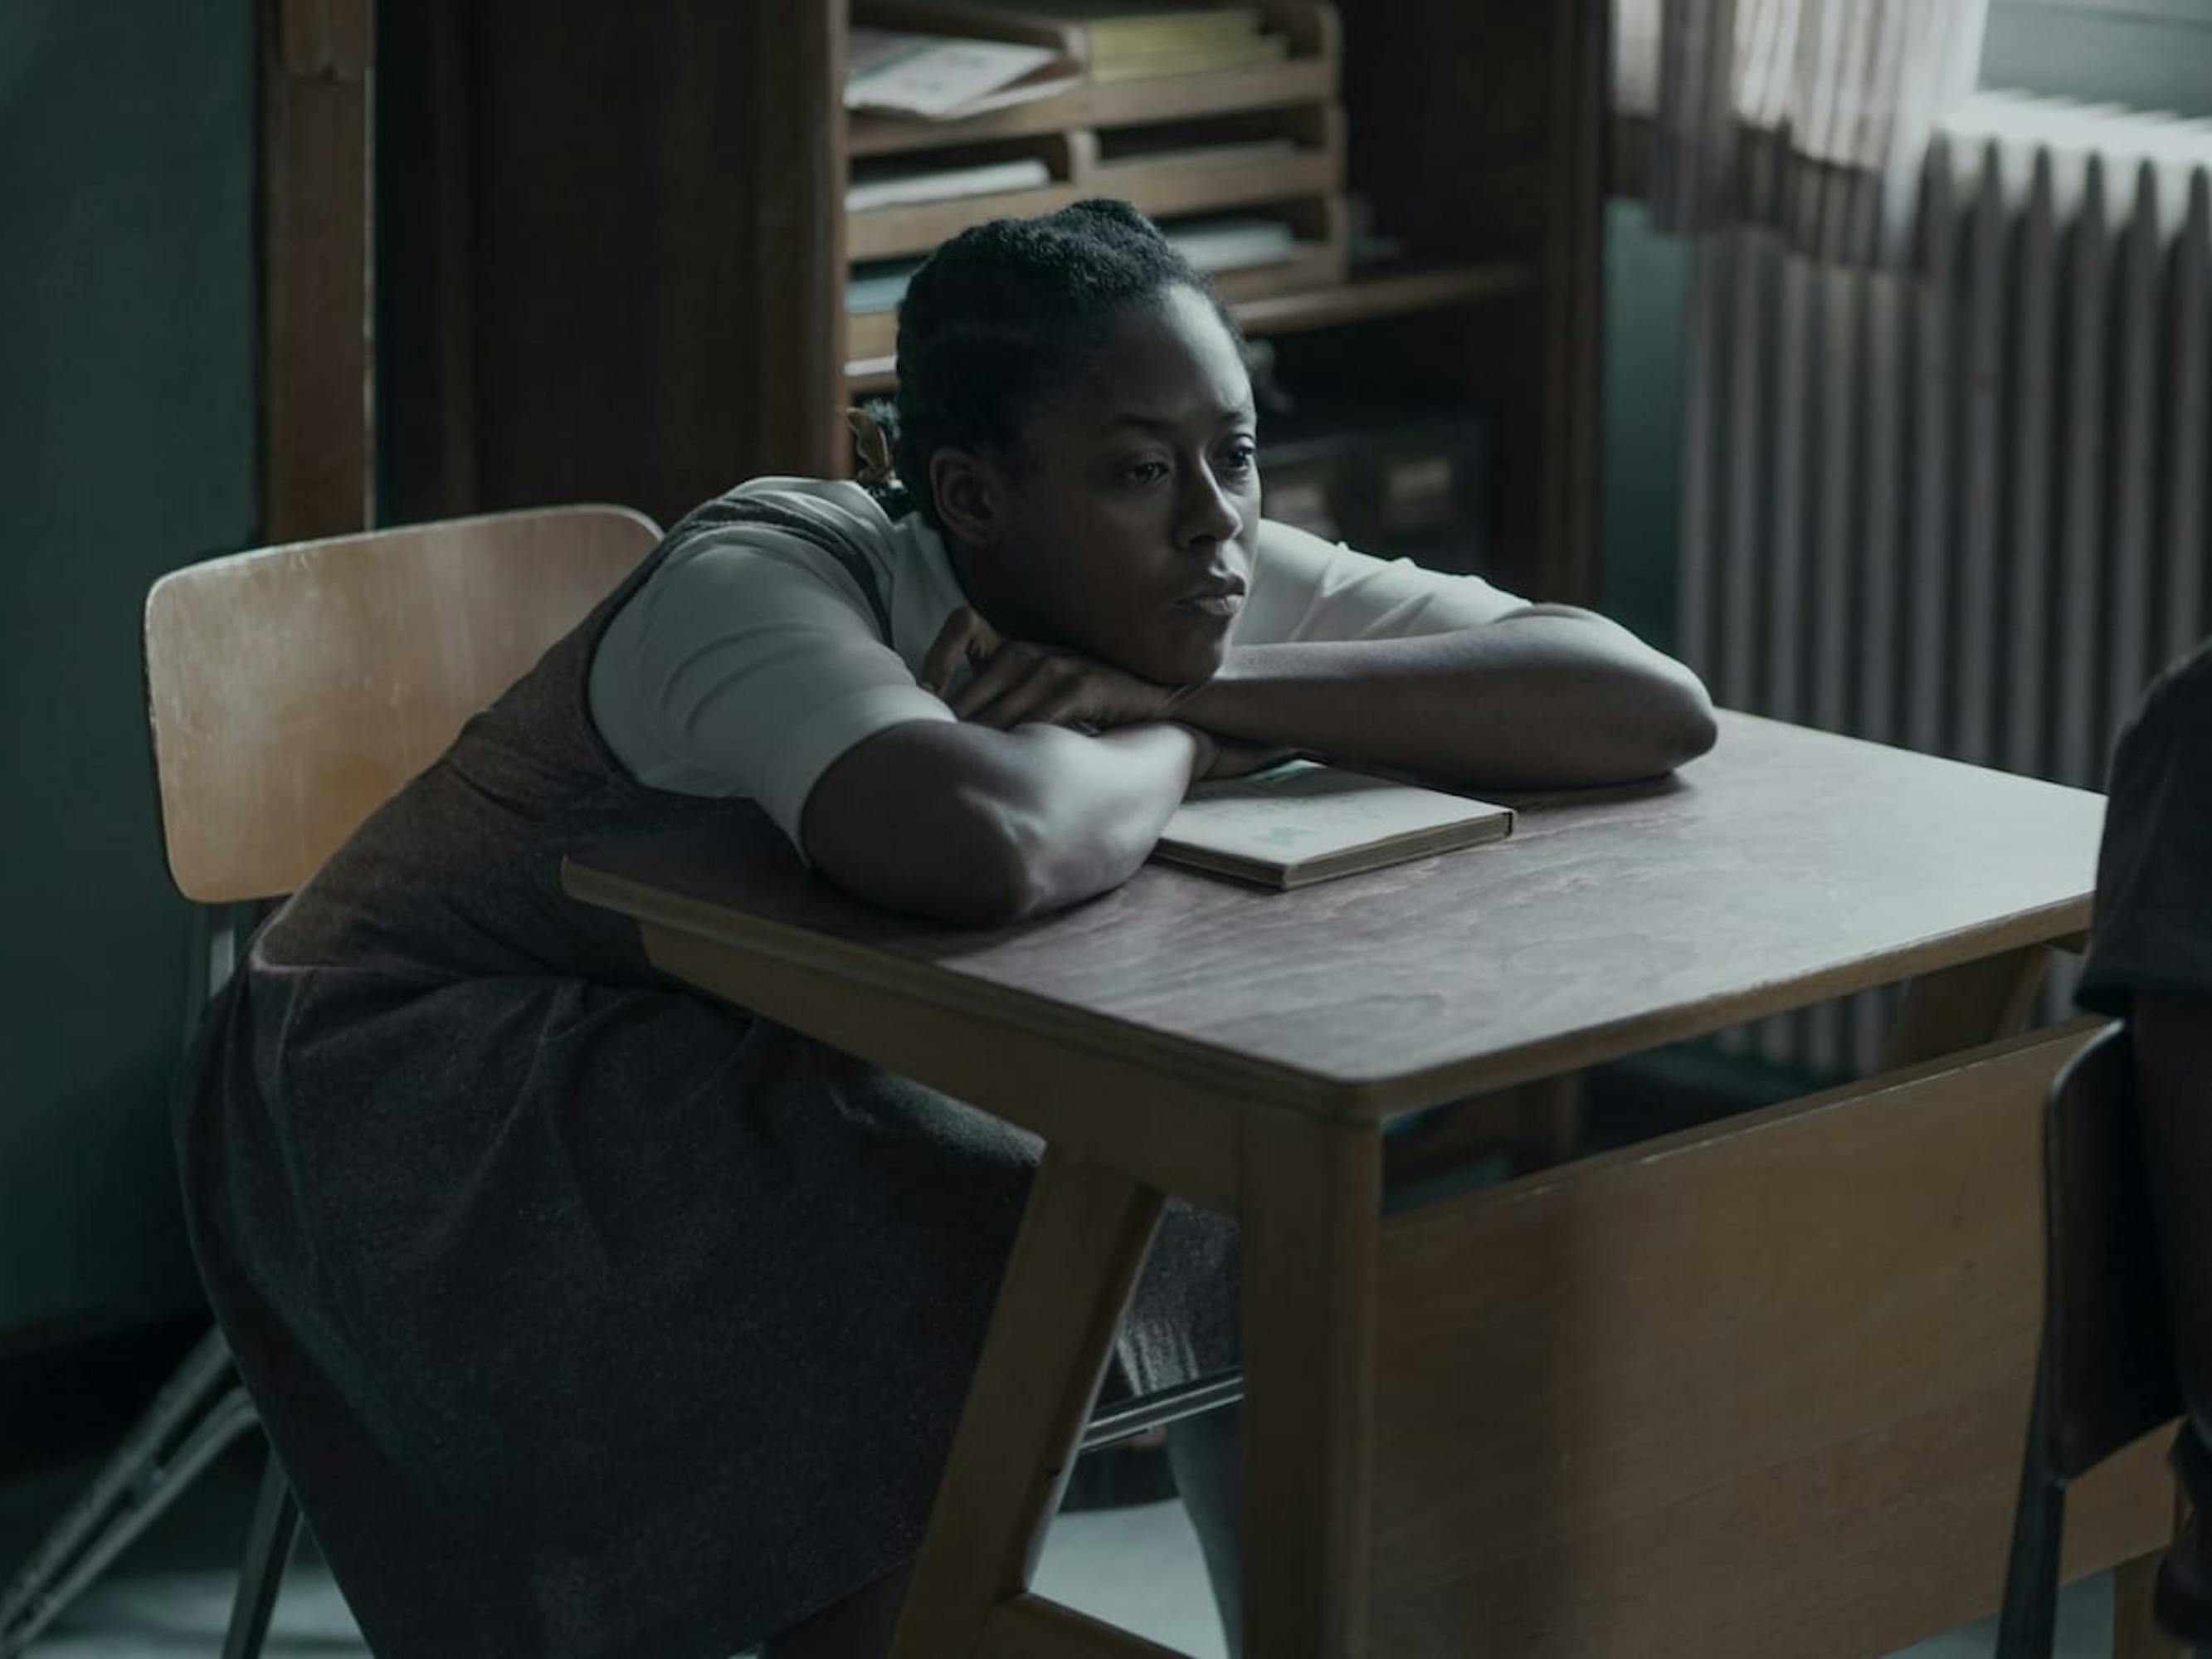 Jolene (Moses Ingram) rests against a desk in a classroom. The desk and chair are wooden, and there are books in a shelf behind her. She wears a long dark dress with a white shirt beneath, and looks bored. 